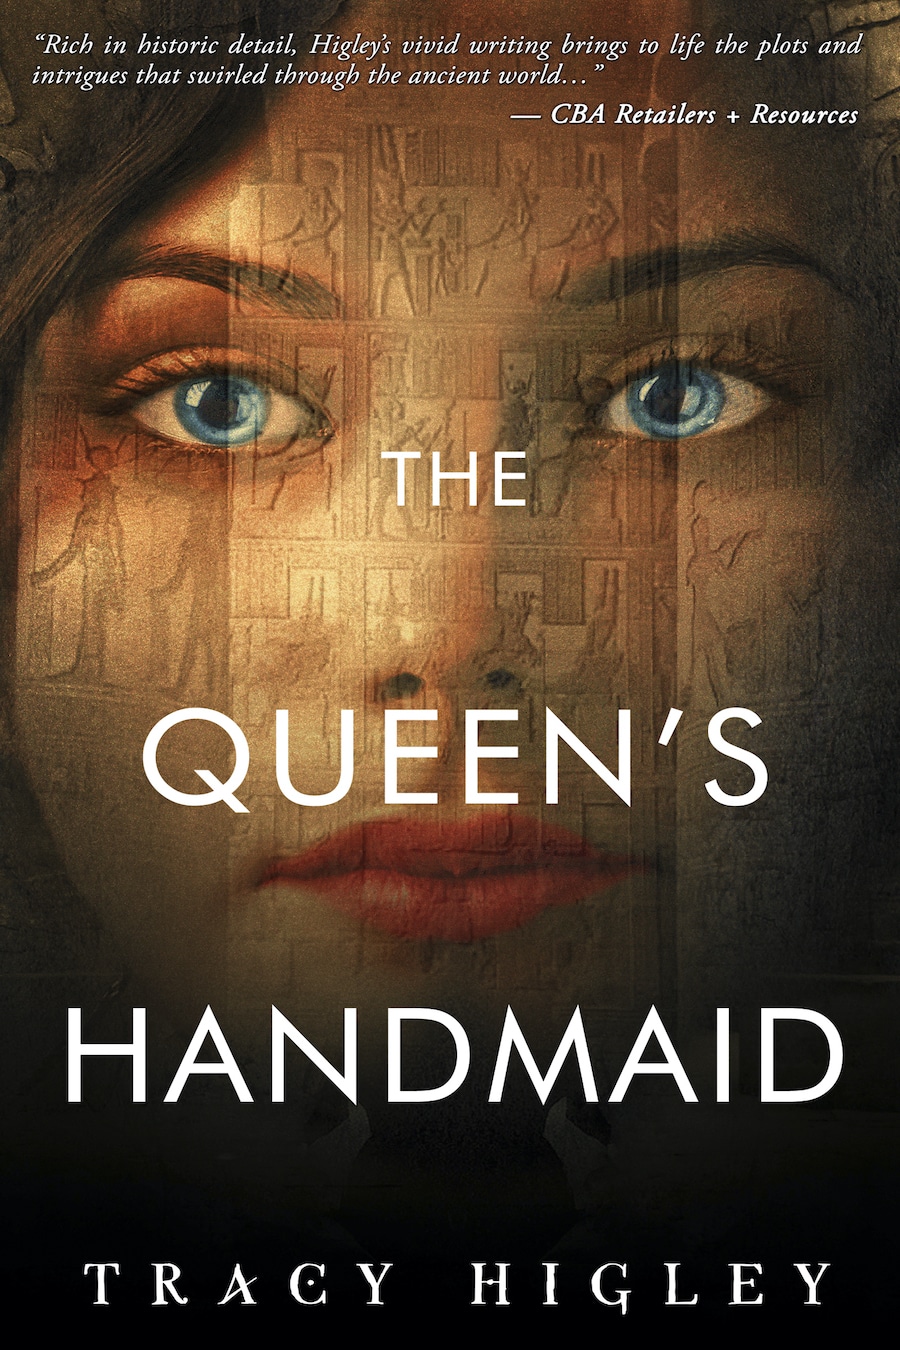 The Queens Handmaid by Tracy Higley